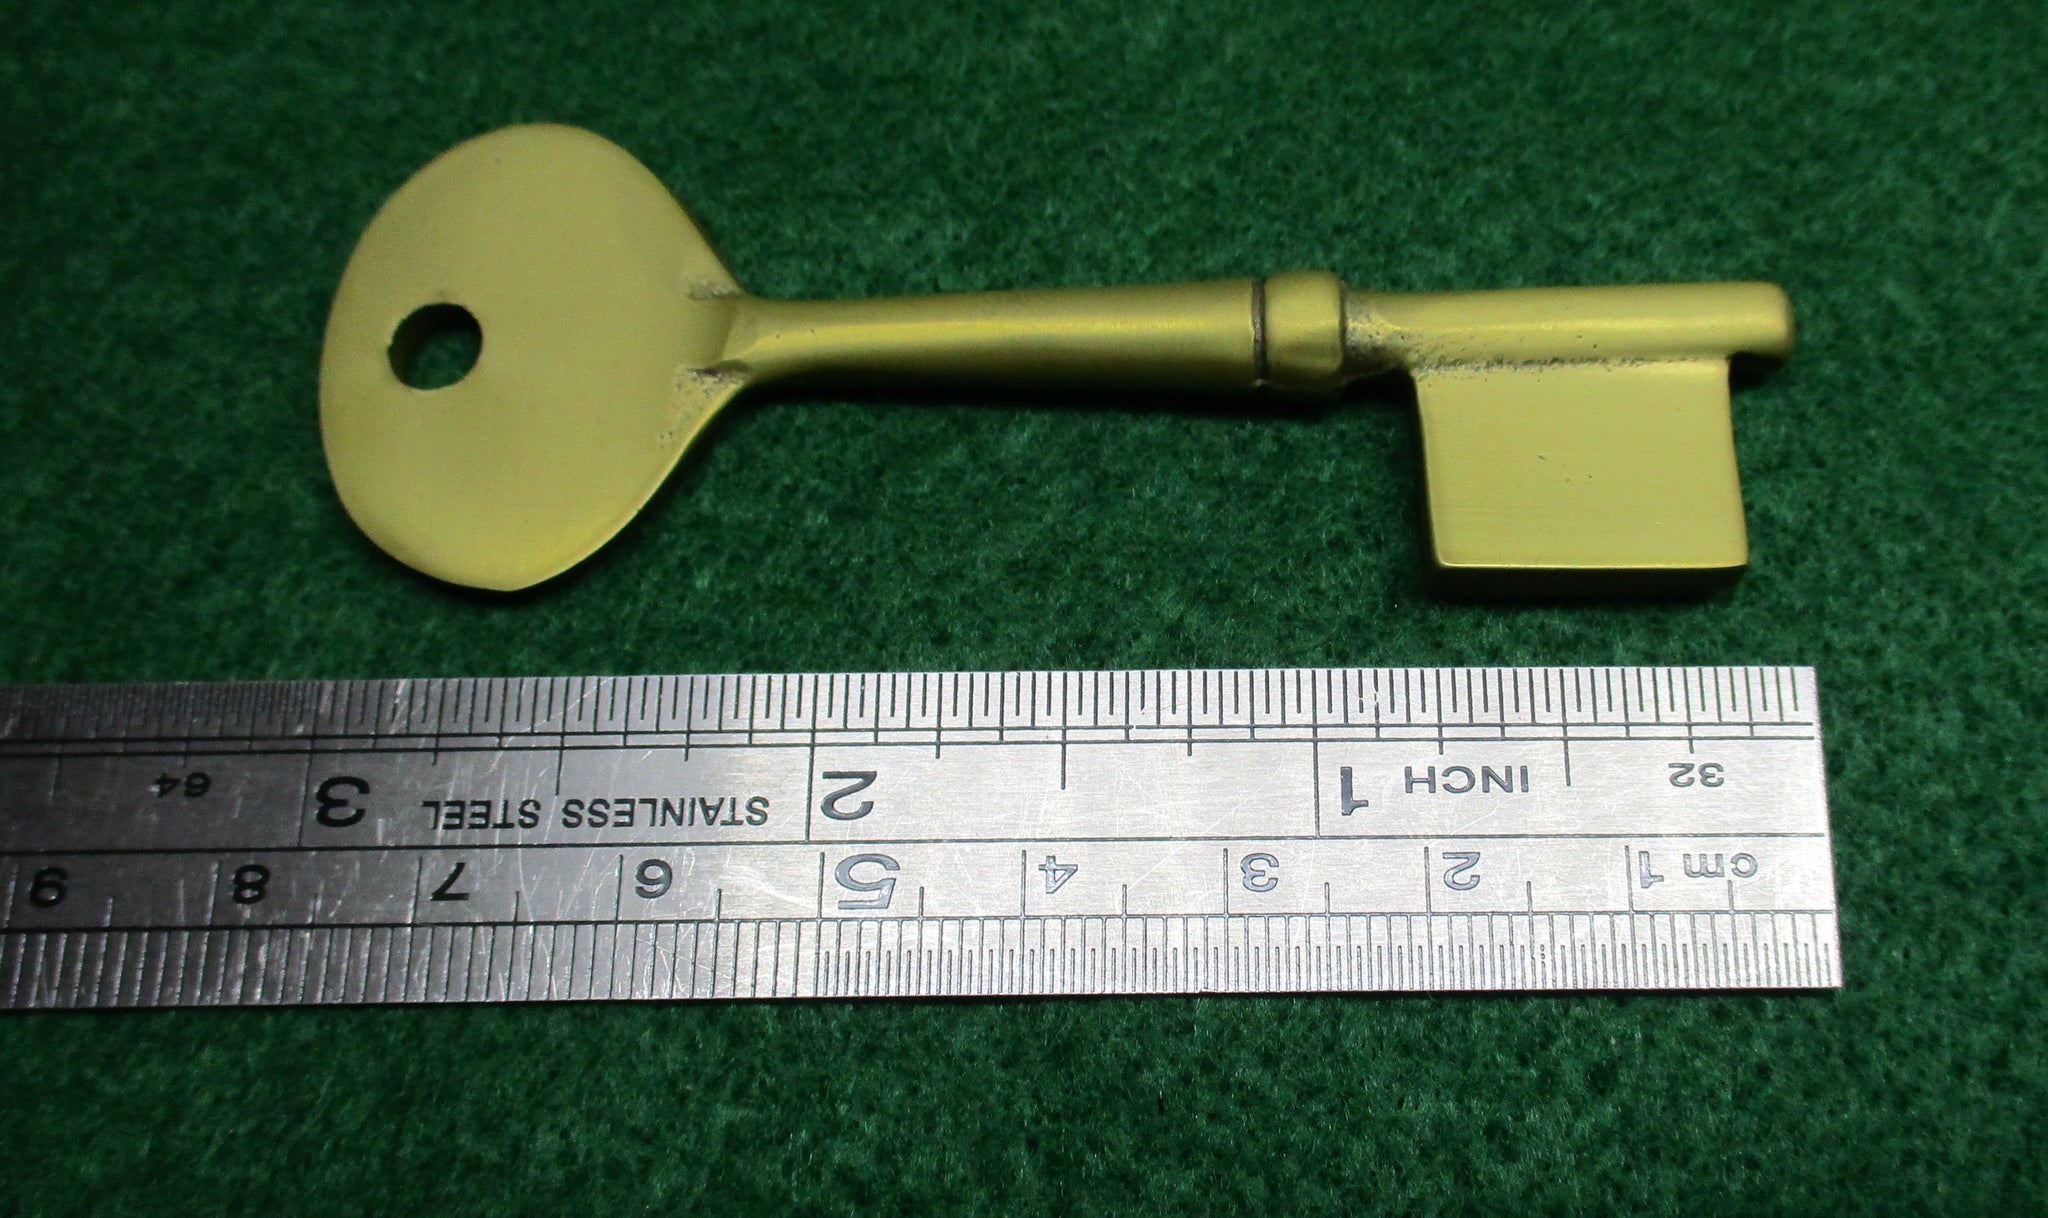 3 1/8" BRASS BIT KEY BLANK with TAPERED END - PERFECT for OLD LOCKS (33224)